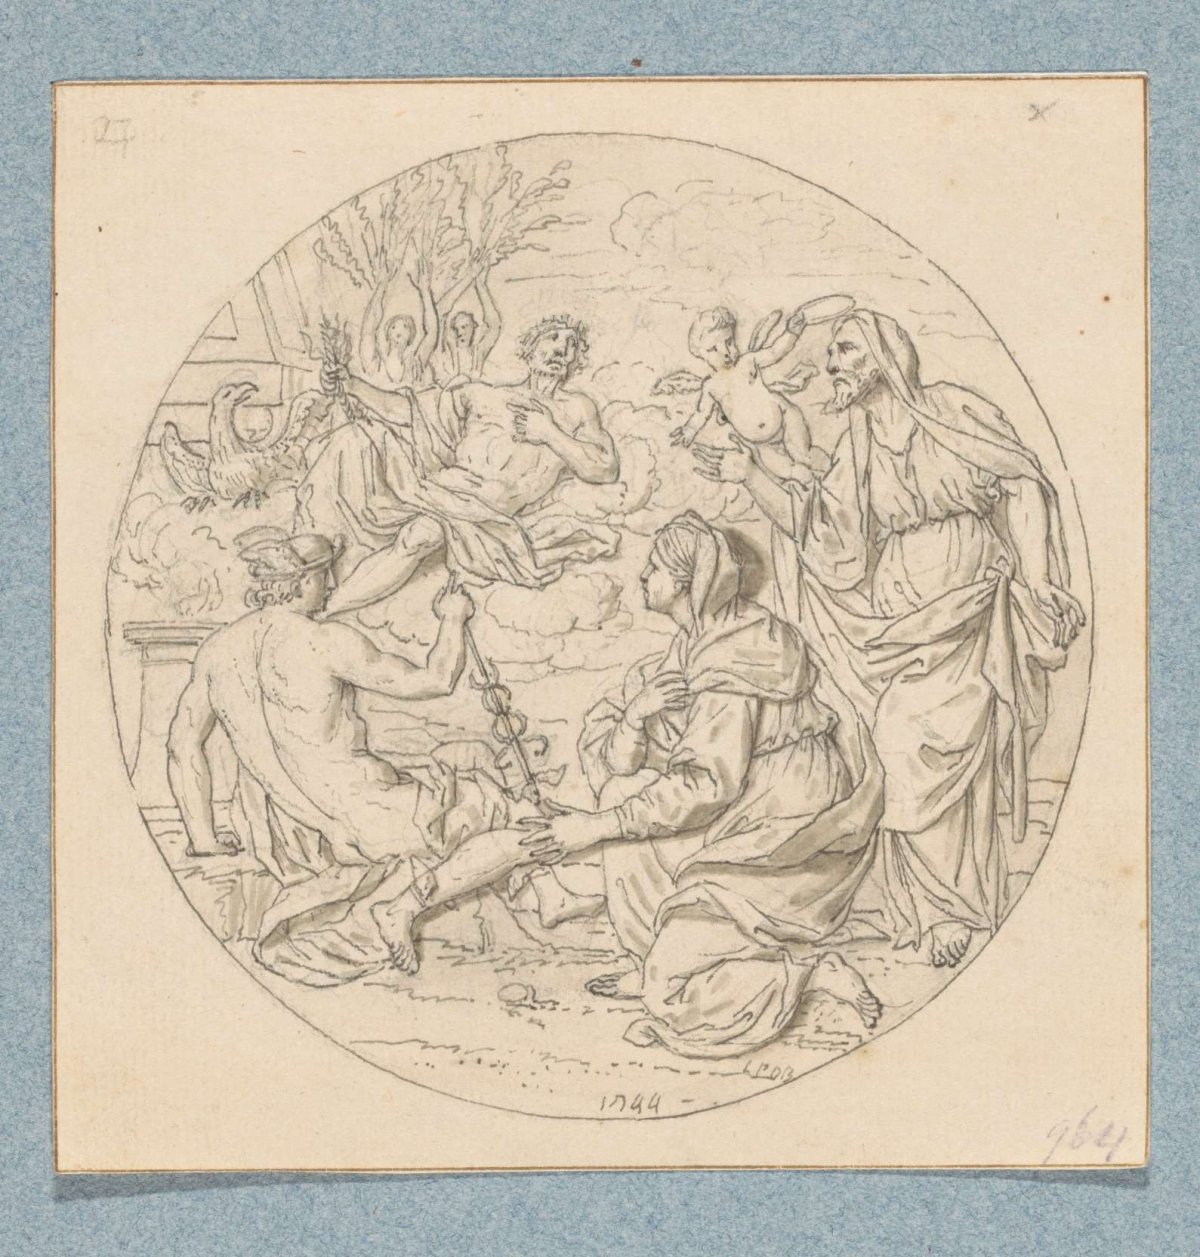 Philemon and Baucis beg Jupiter to stay together (in box with 43 drawings), Louis Fabritius Dubourg, 1744